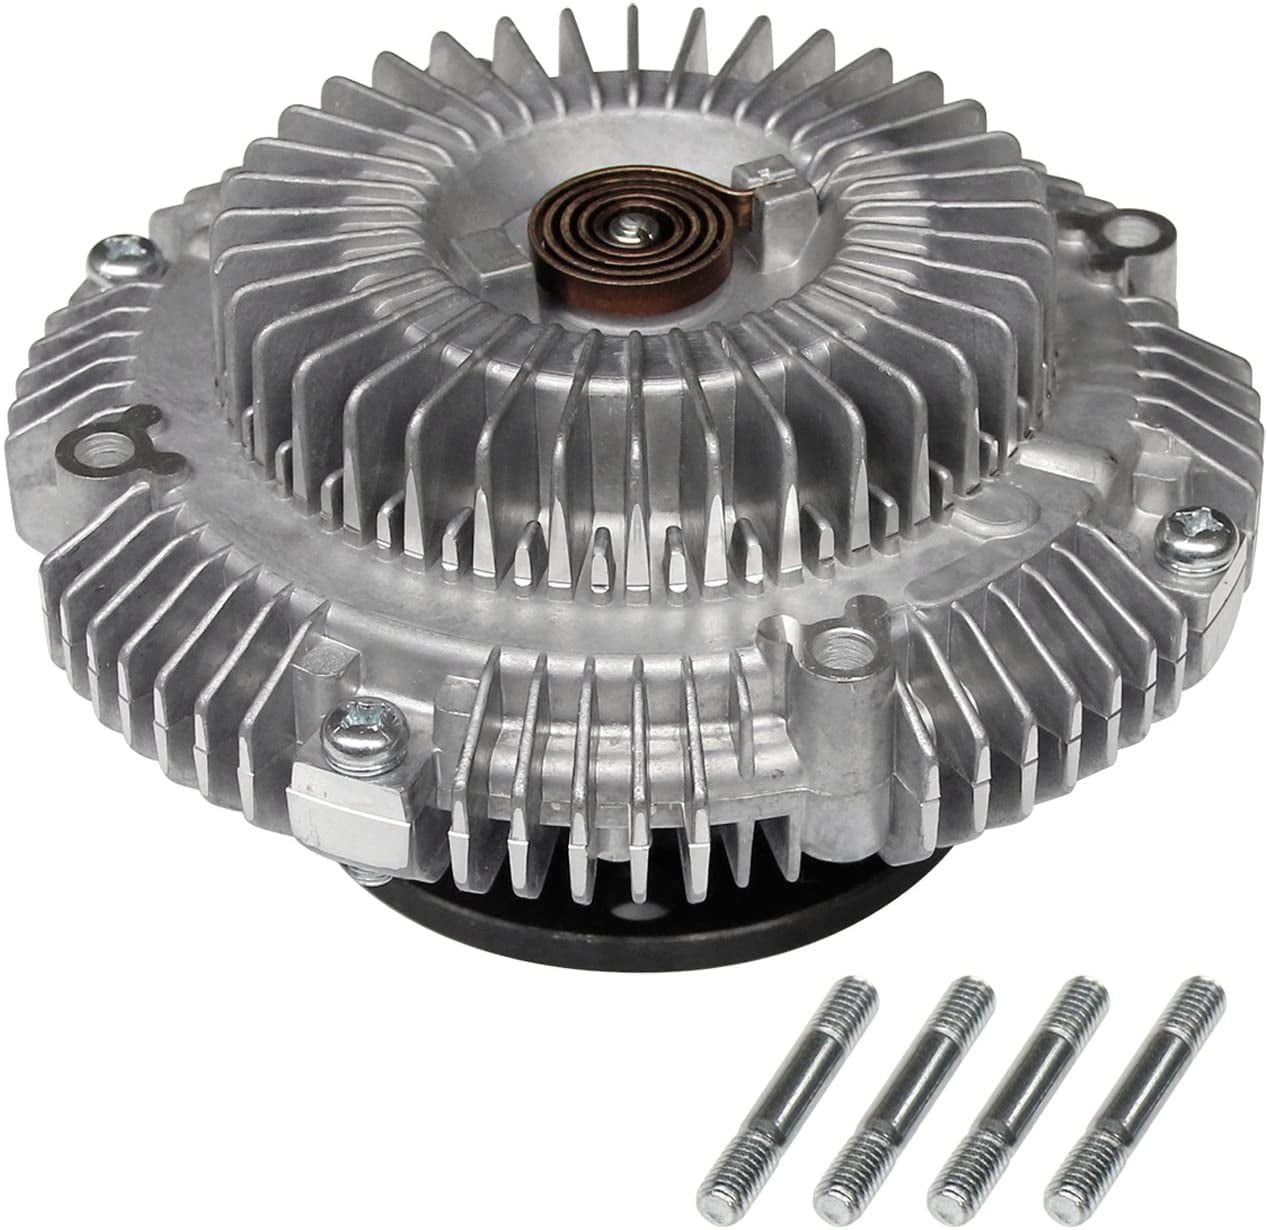 TOPAZ 2679 Engine Cooling Thermal Fan Clutch for Toyota 4 Runner Sequoia Tundra Lexus GX470 2003-2005 4.7L V8 